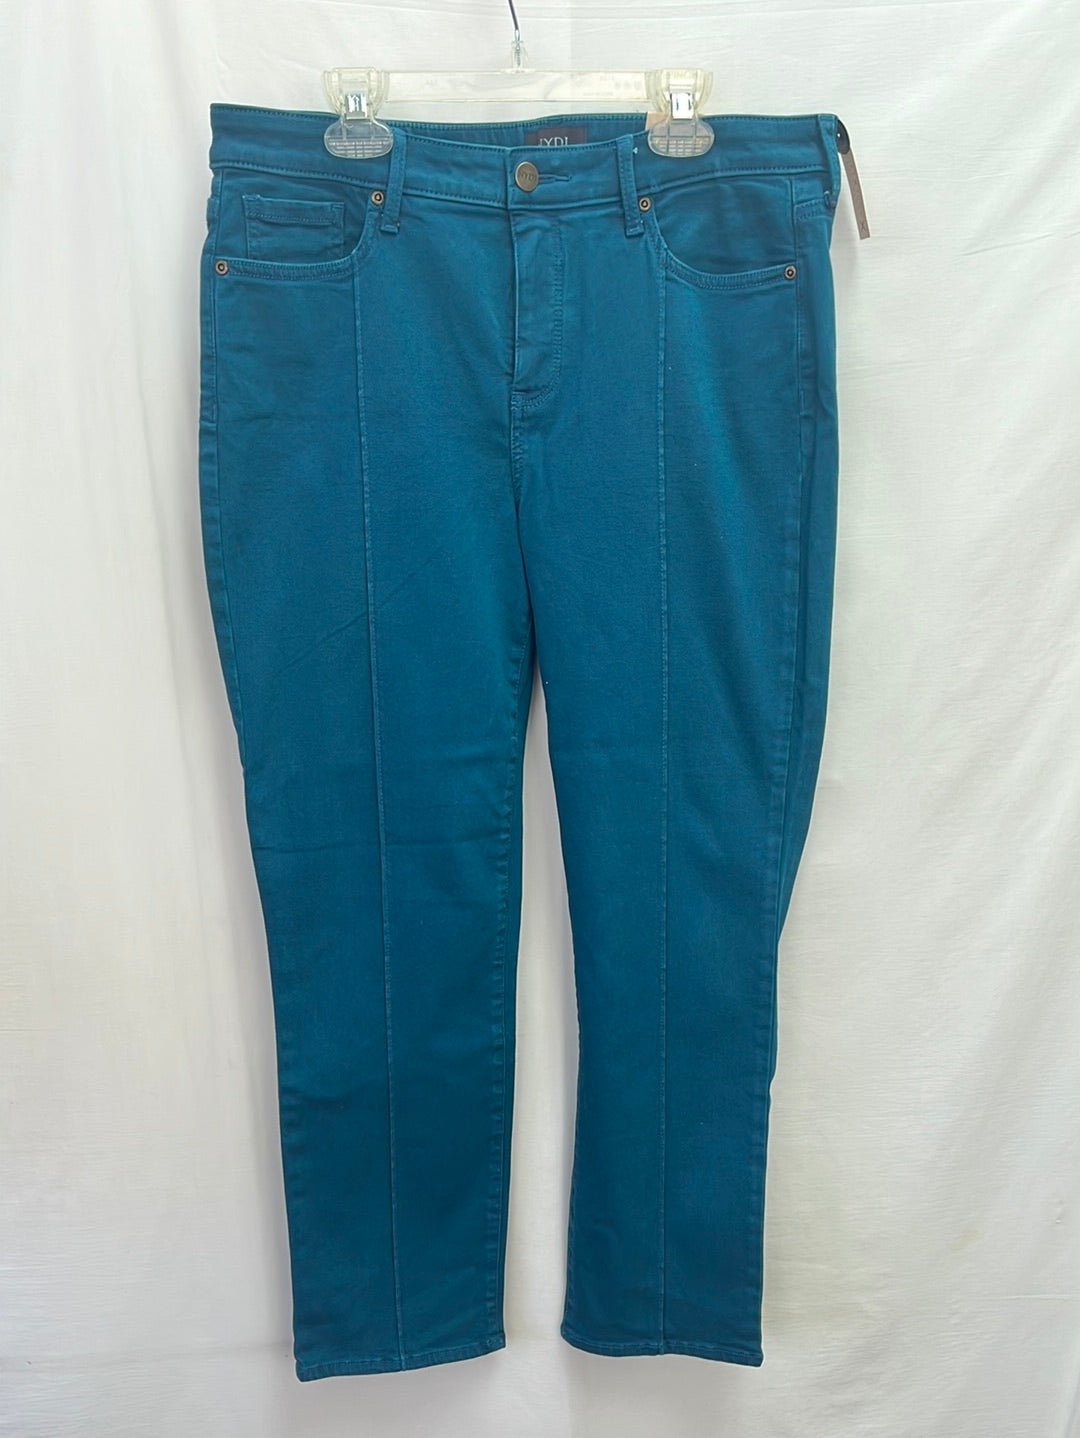 NWT - J. Jill Montreal Light Wash Fit Slim Ankle Jeans - 2P